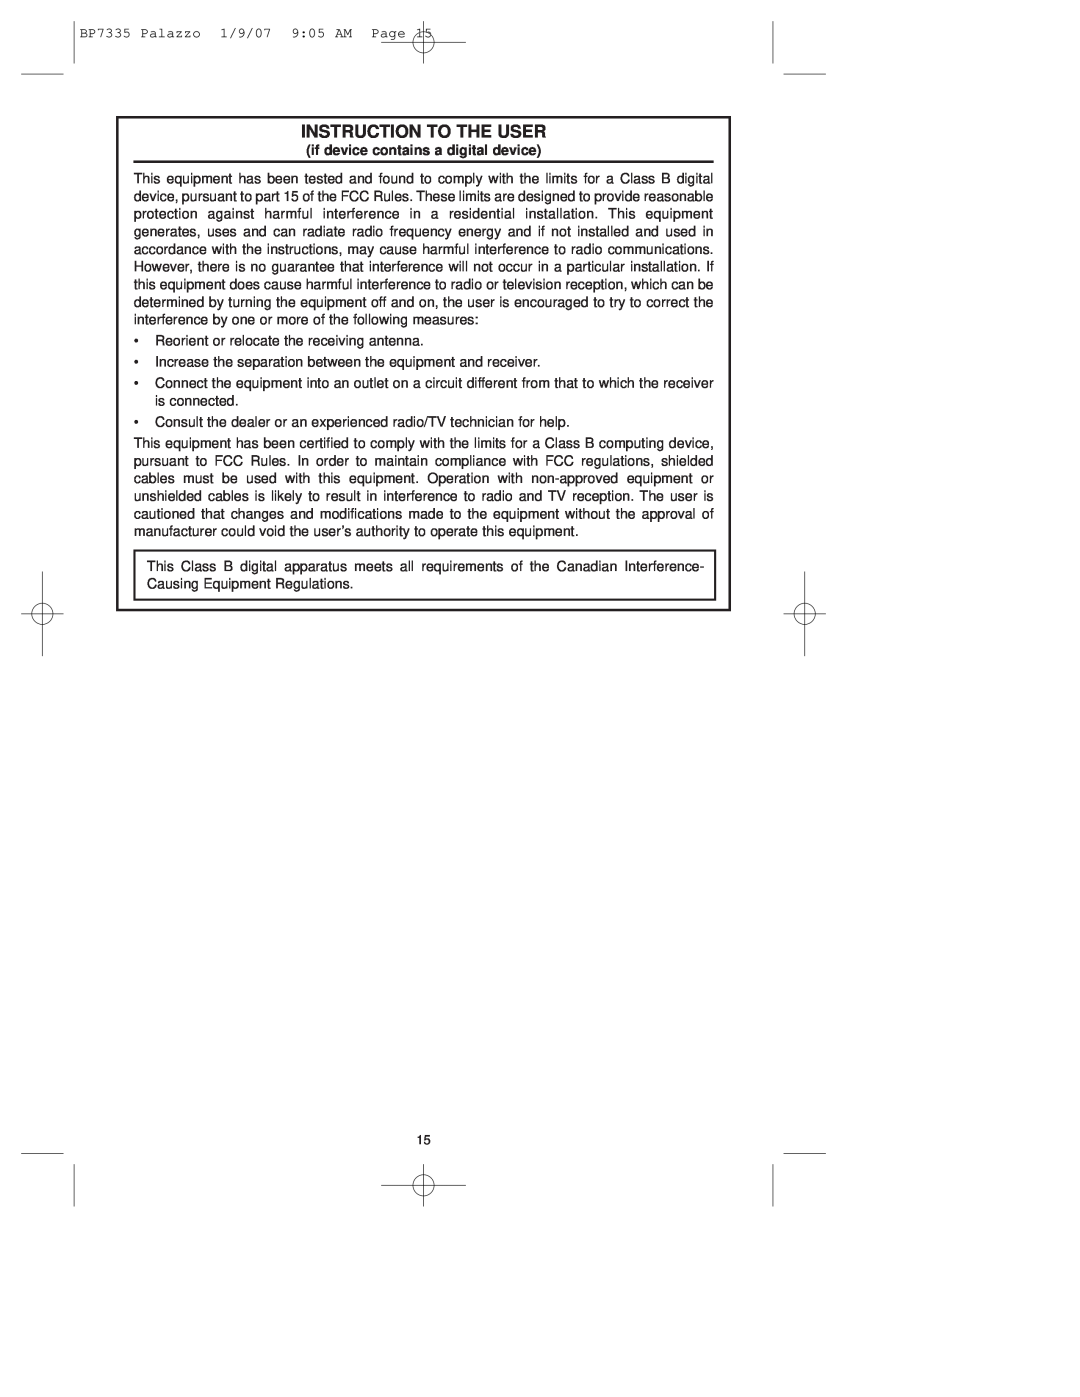 Emerson CF943 owner manual Instruction To The User, if device contains a digital device 